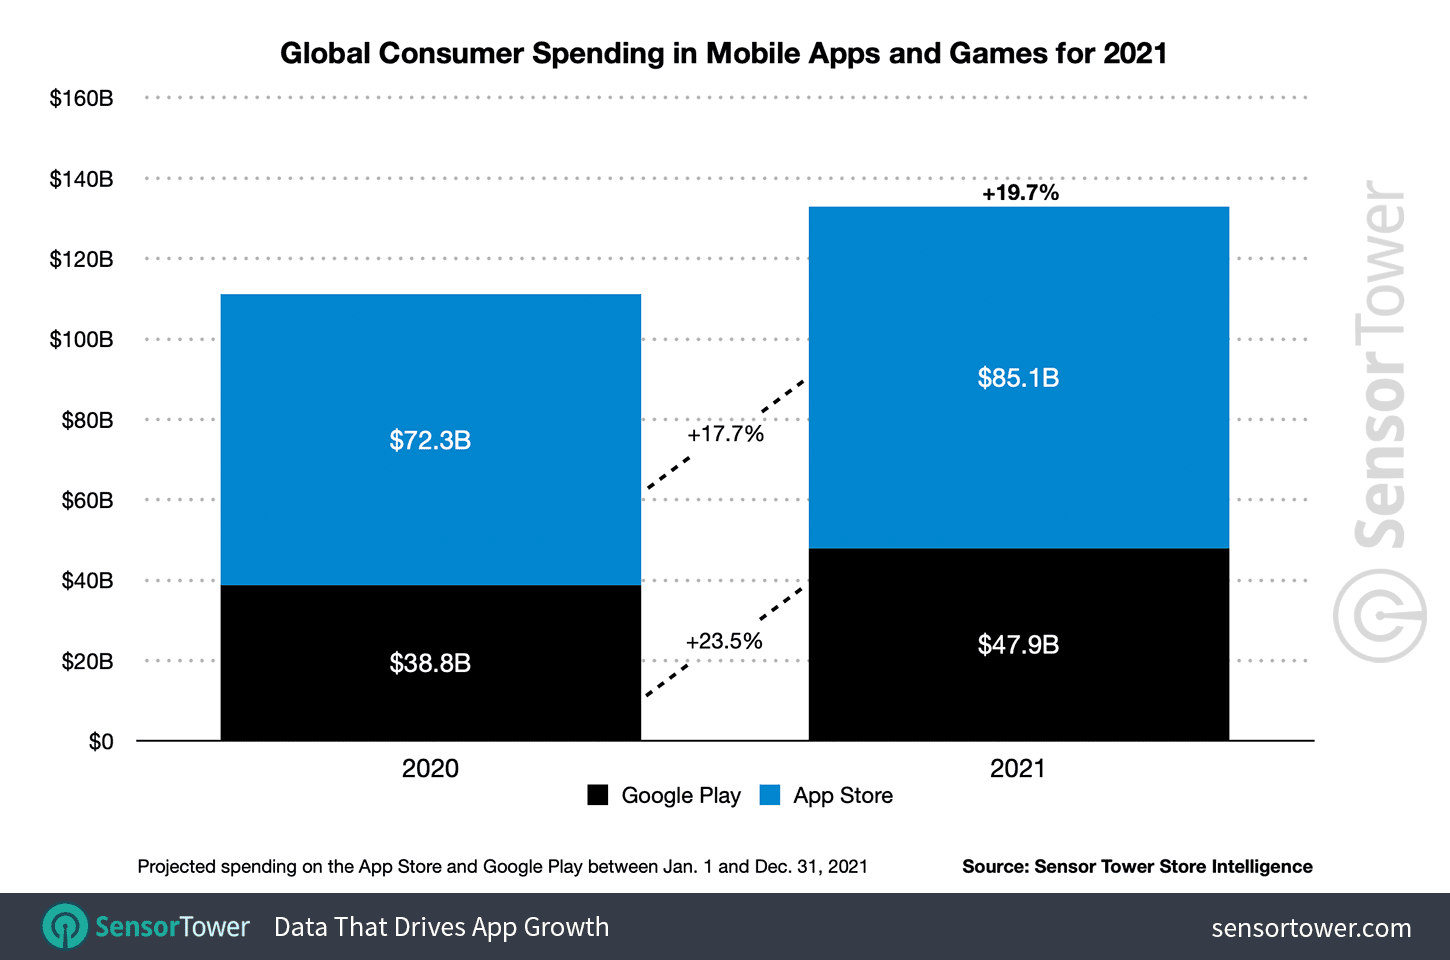 Global consumer spending in non-game apps grew 19.7 percent to $133 billion in 2021.